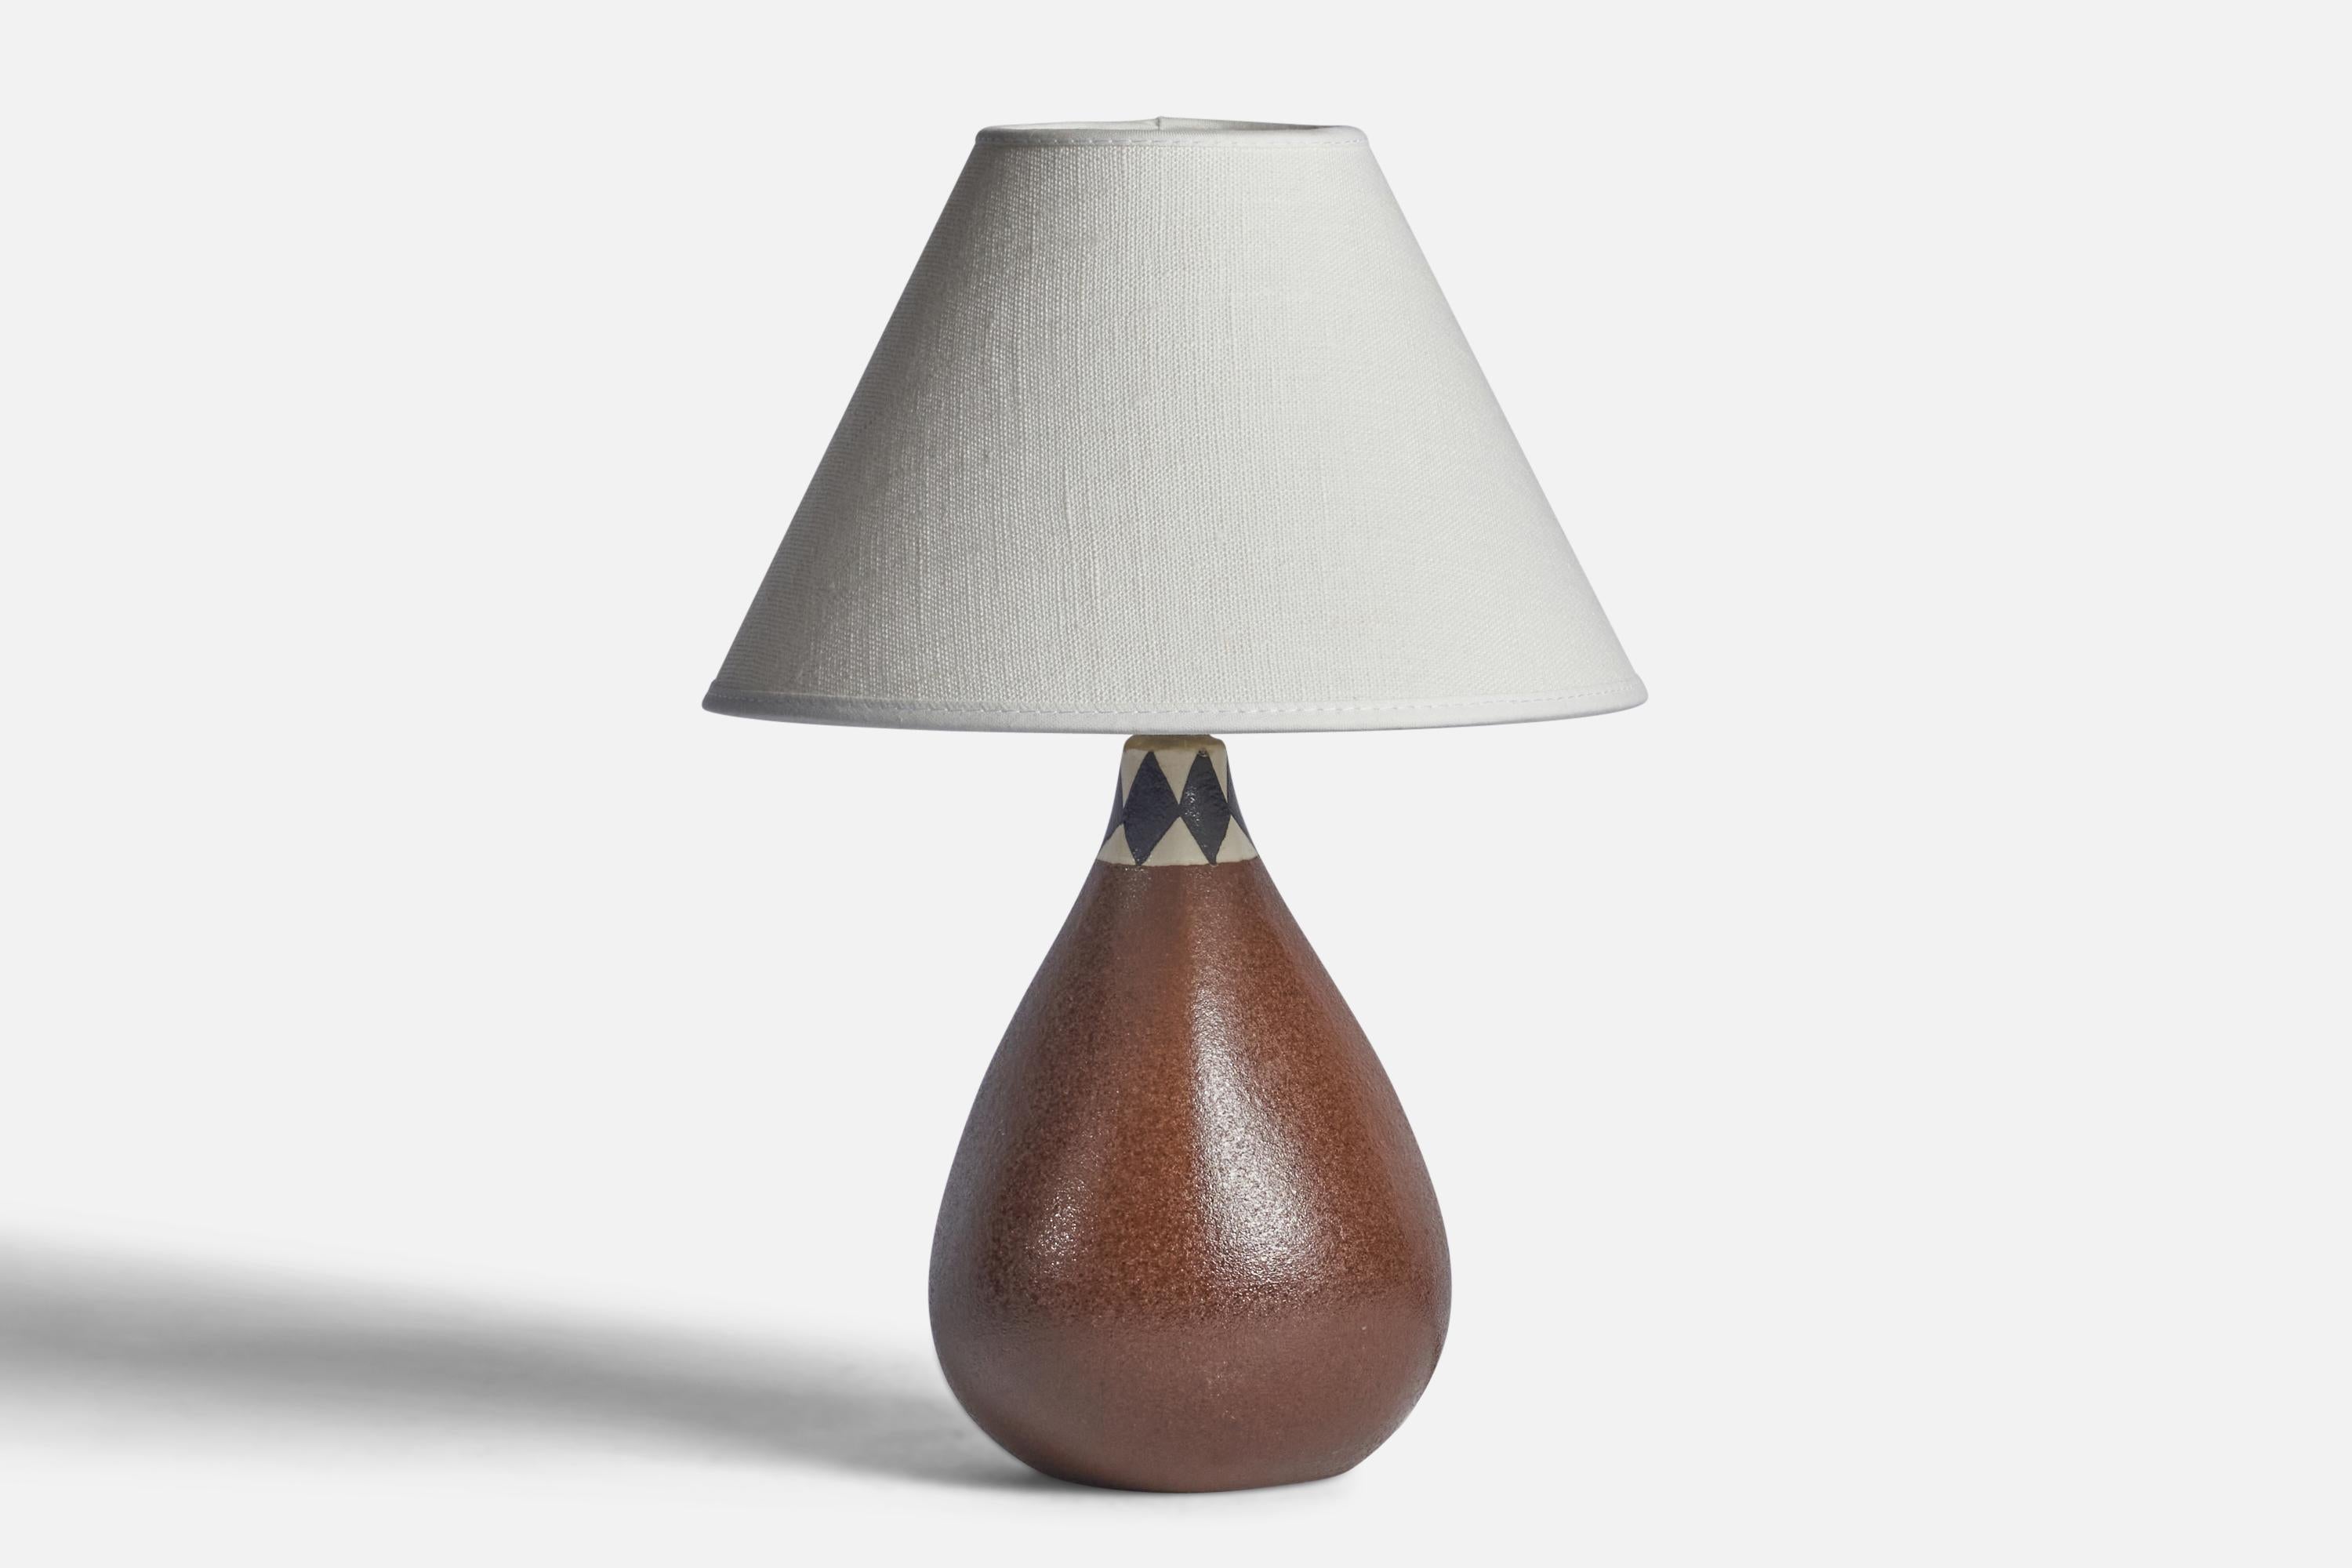 A brown white and black-glazed stoneware table lamp designed and produced in Sweden, 1960s.

Dimensions of Lamp (inches): 8.75” H x 4.5” Diameter
Dimensions of Shade (inches): 3” Top Diameter x 8” Bottom Diameter x 5” H 
Dimensions of Lamp with